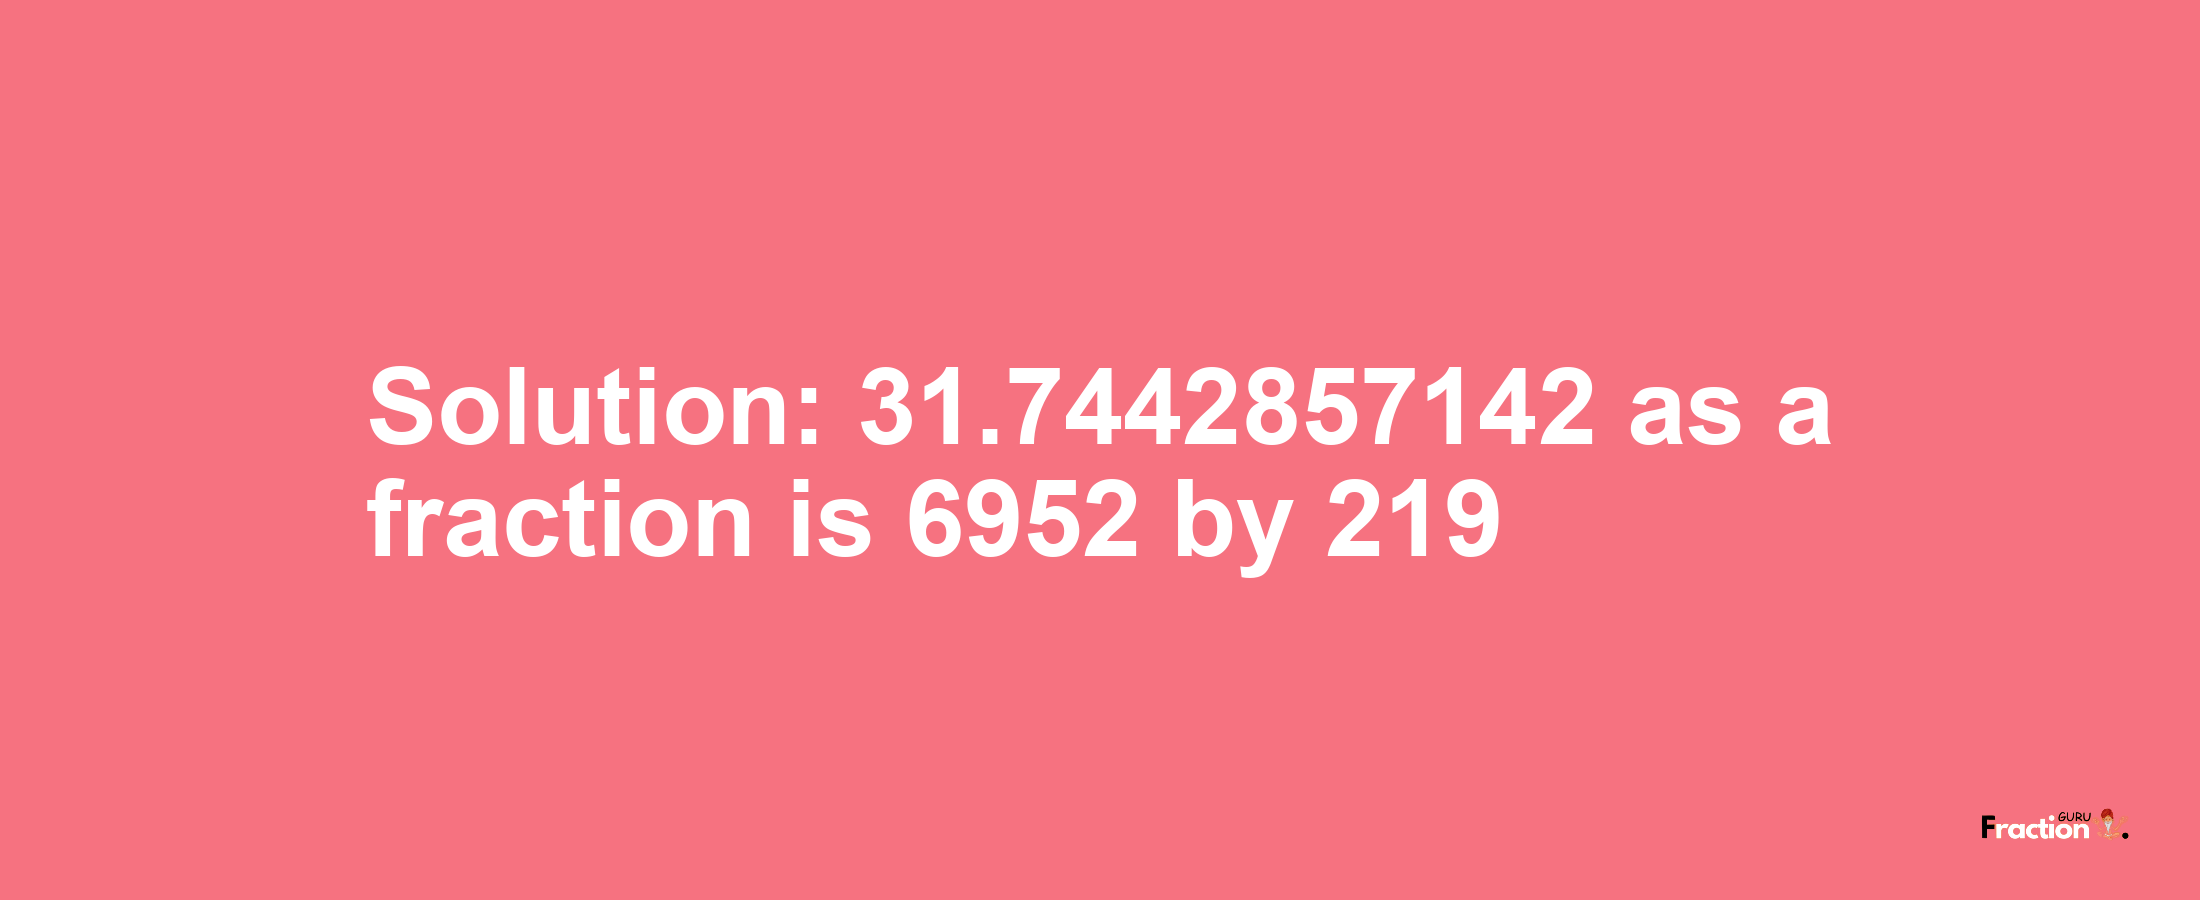 Solution:31.7442857142 as a fraction is 6952/219